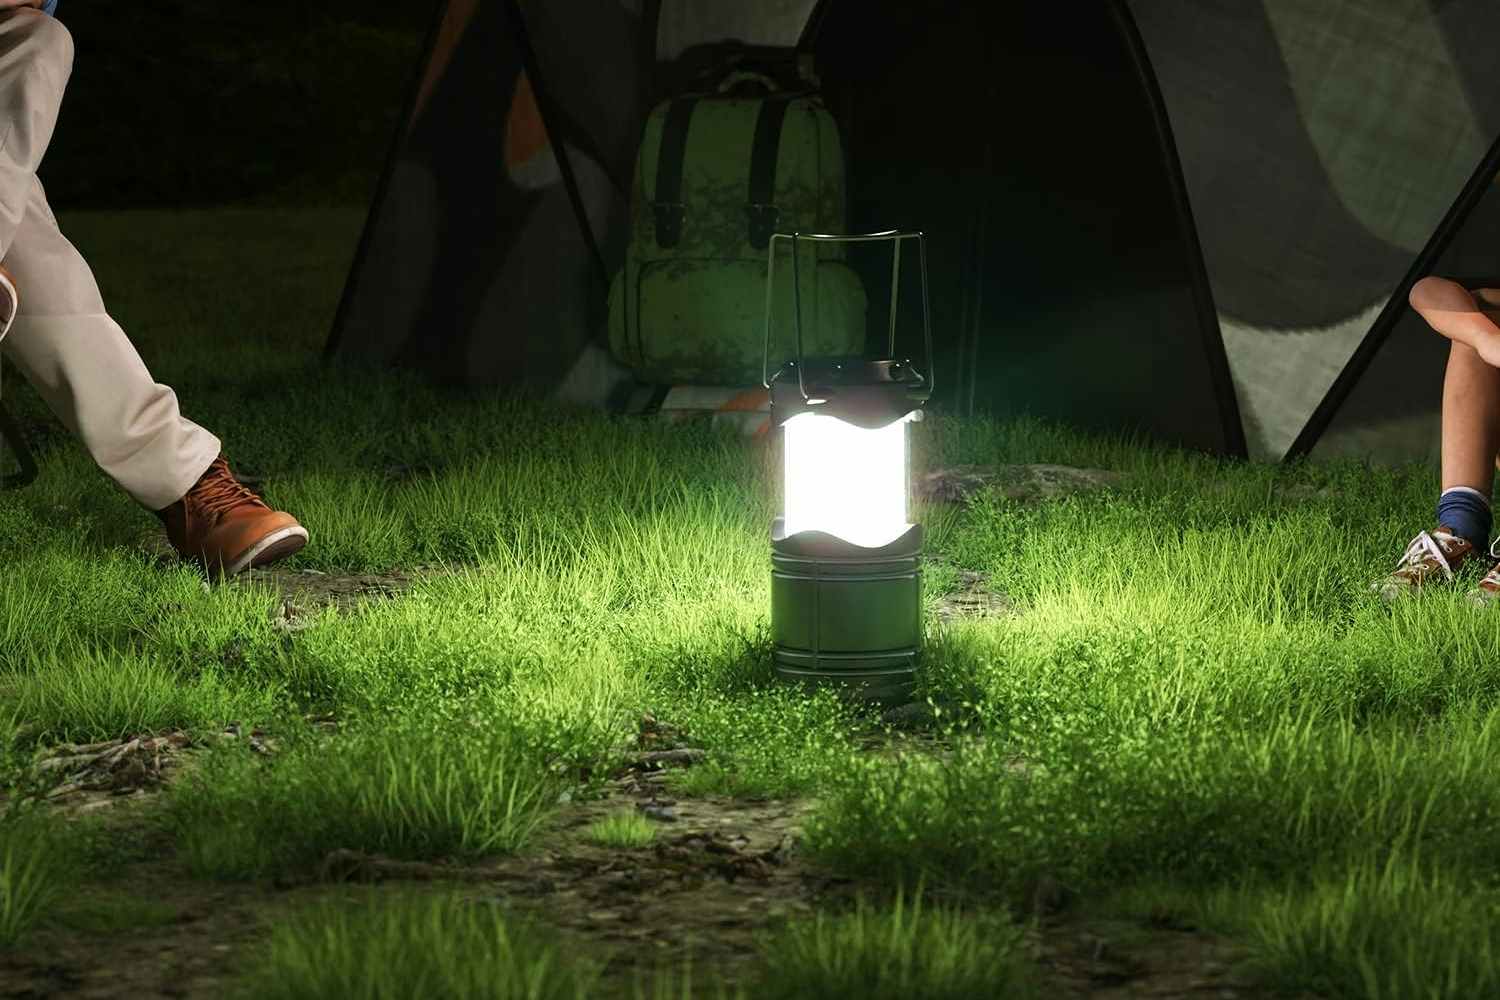 LED Camping Lanterns: Get 4 for $11.49 on Amazon